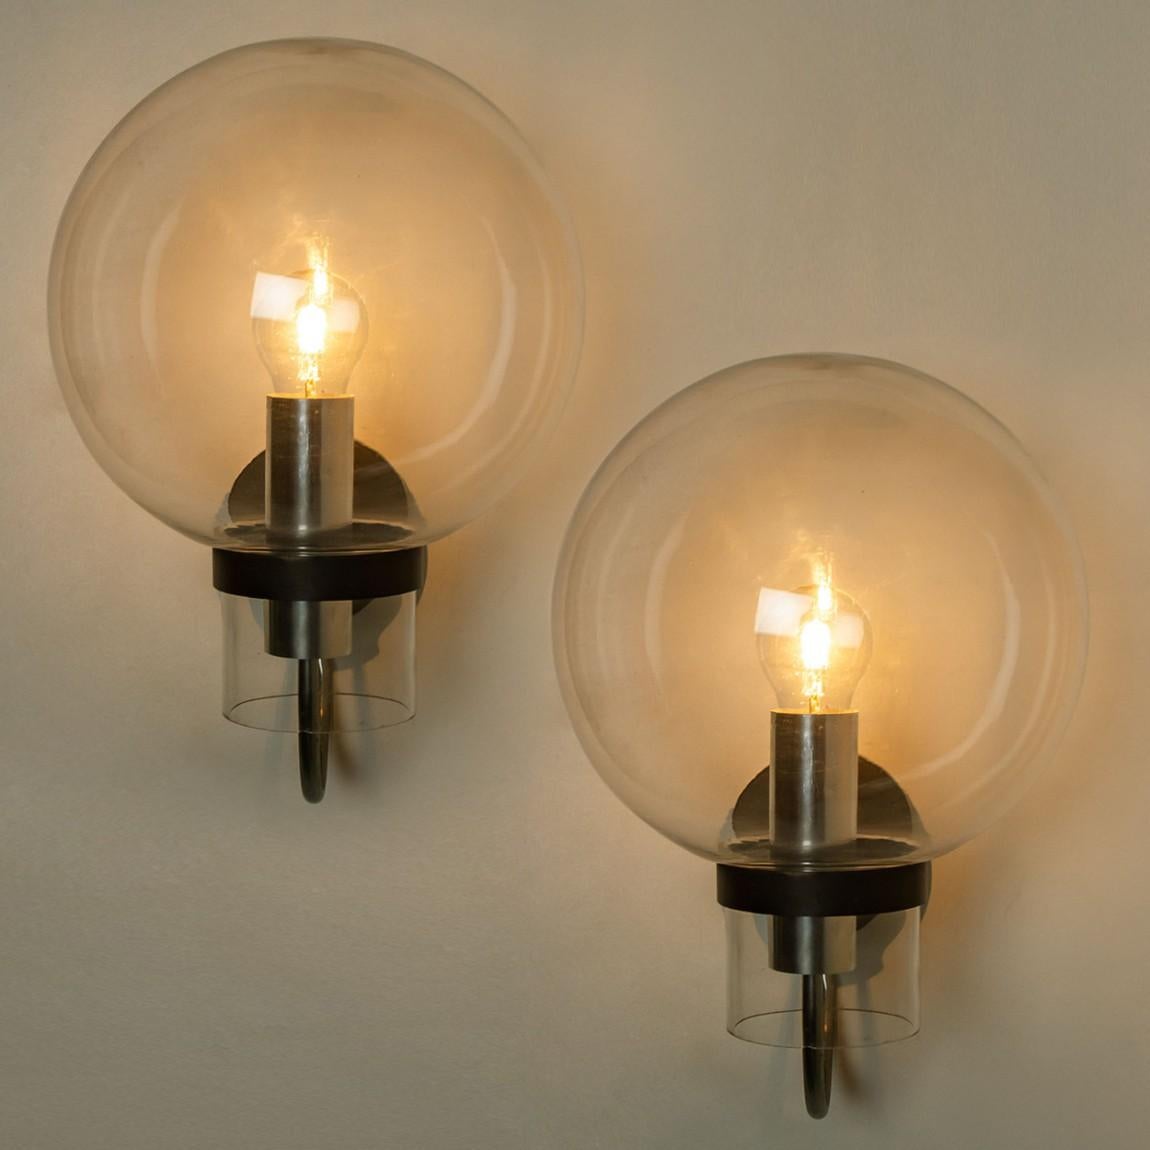 Late 20th Century Clear Glass and Metal Wall Lamps by Glashütte Limburg, 1975s For Sale